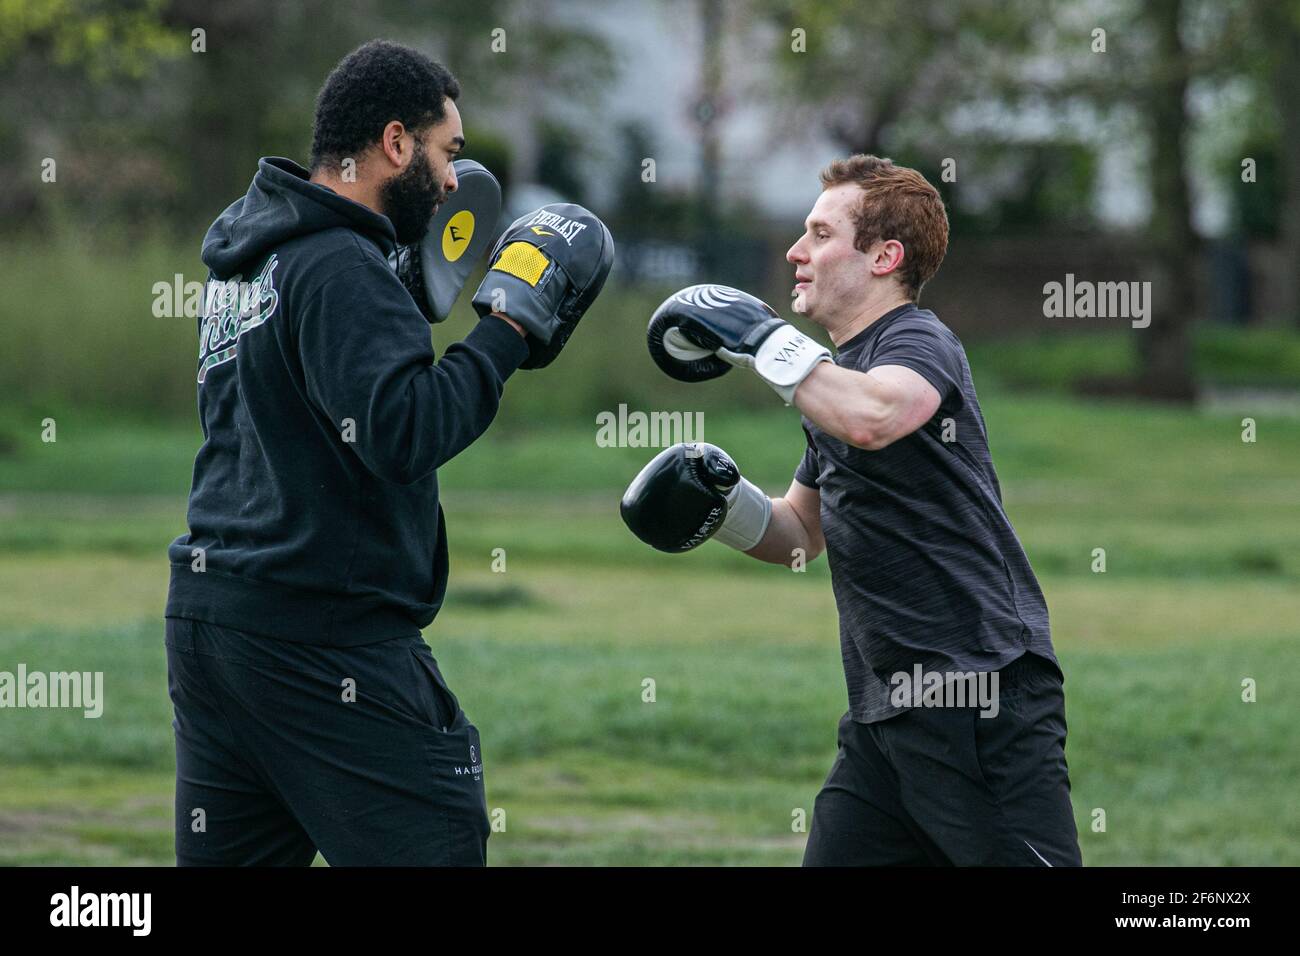 WIMBLEDON LONDON, UK 2 April 2021. Two men sparring with boxing gloves on an overcast day on Wimbledon Common as lockdown restrictions are lifted. A cold spell is  forecast  over the Easter weekend in London with  a drop in temperatures following unseasonably warm temperatures. Credit amer ghazzal/Alamy Live News Stock Photo